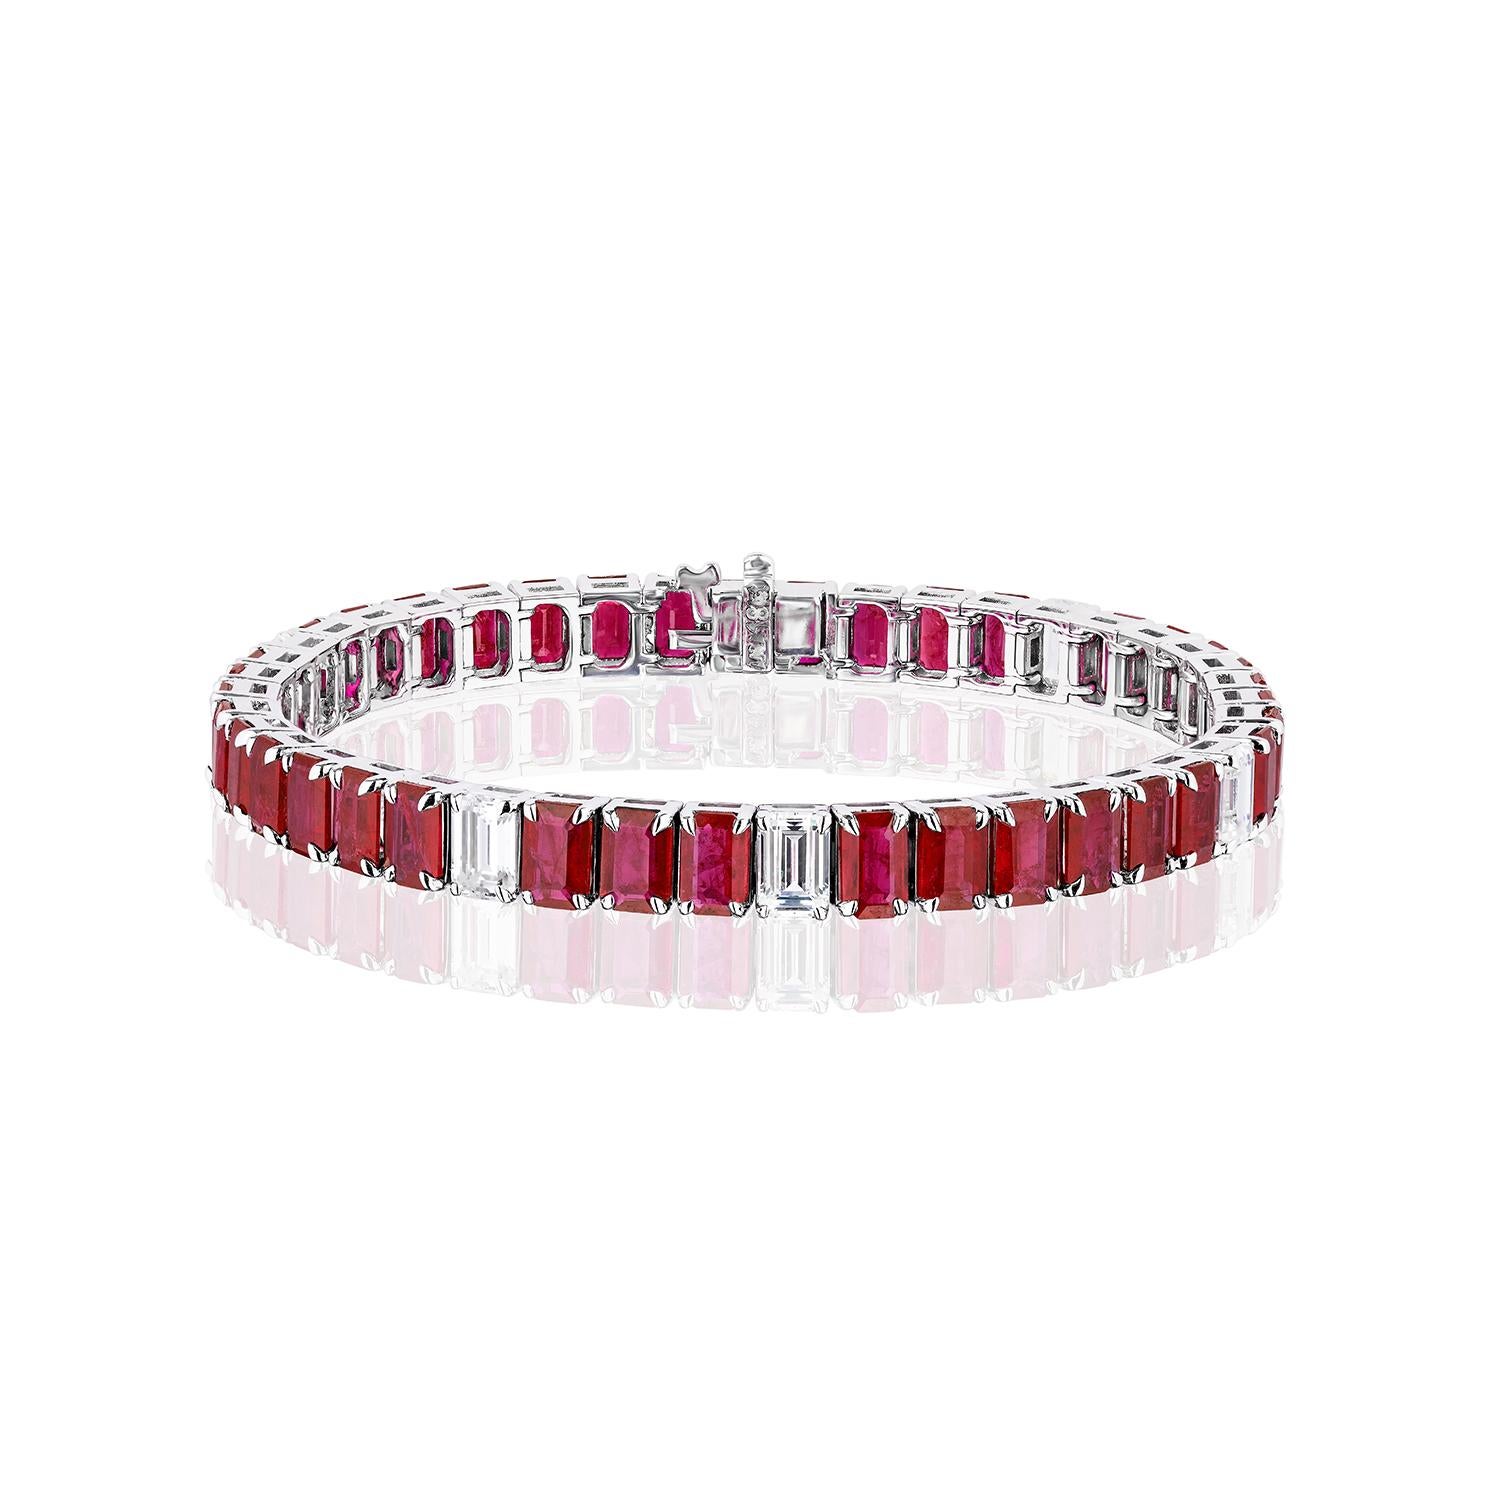 38 beautifully matched Emerald Cut Rubies weighing 21.76 Carats and randomly spaced with 5 Emerald Cut White Diamonds weighing 2.53 Carats.

Set in 18 Karat White Gold.
Measures 7 inches.